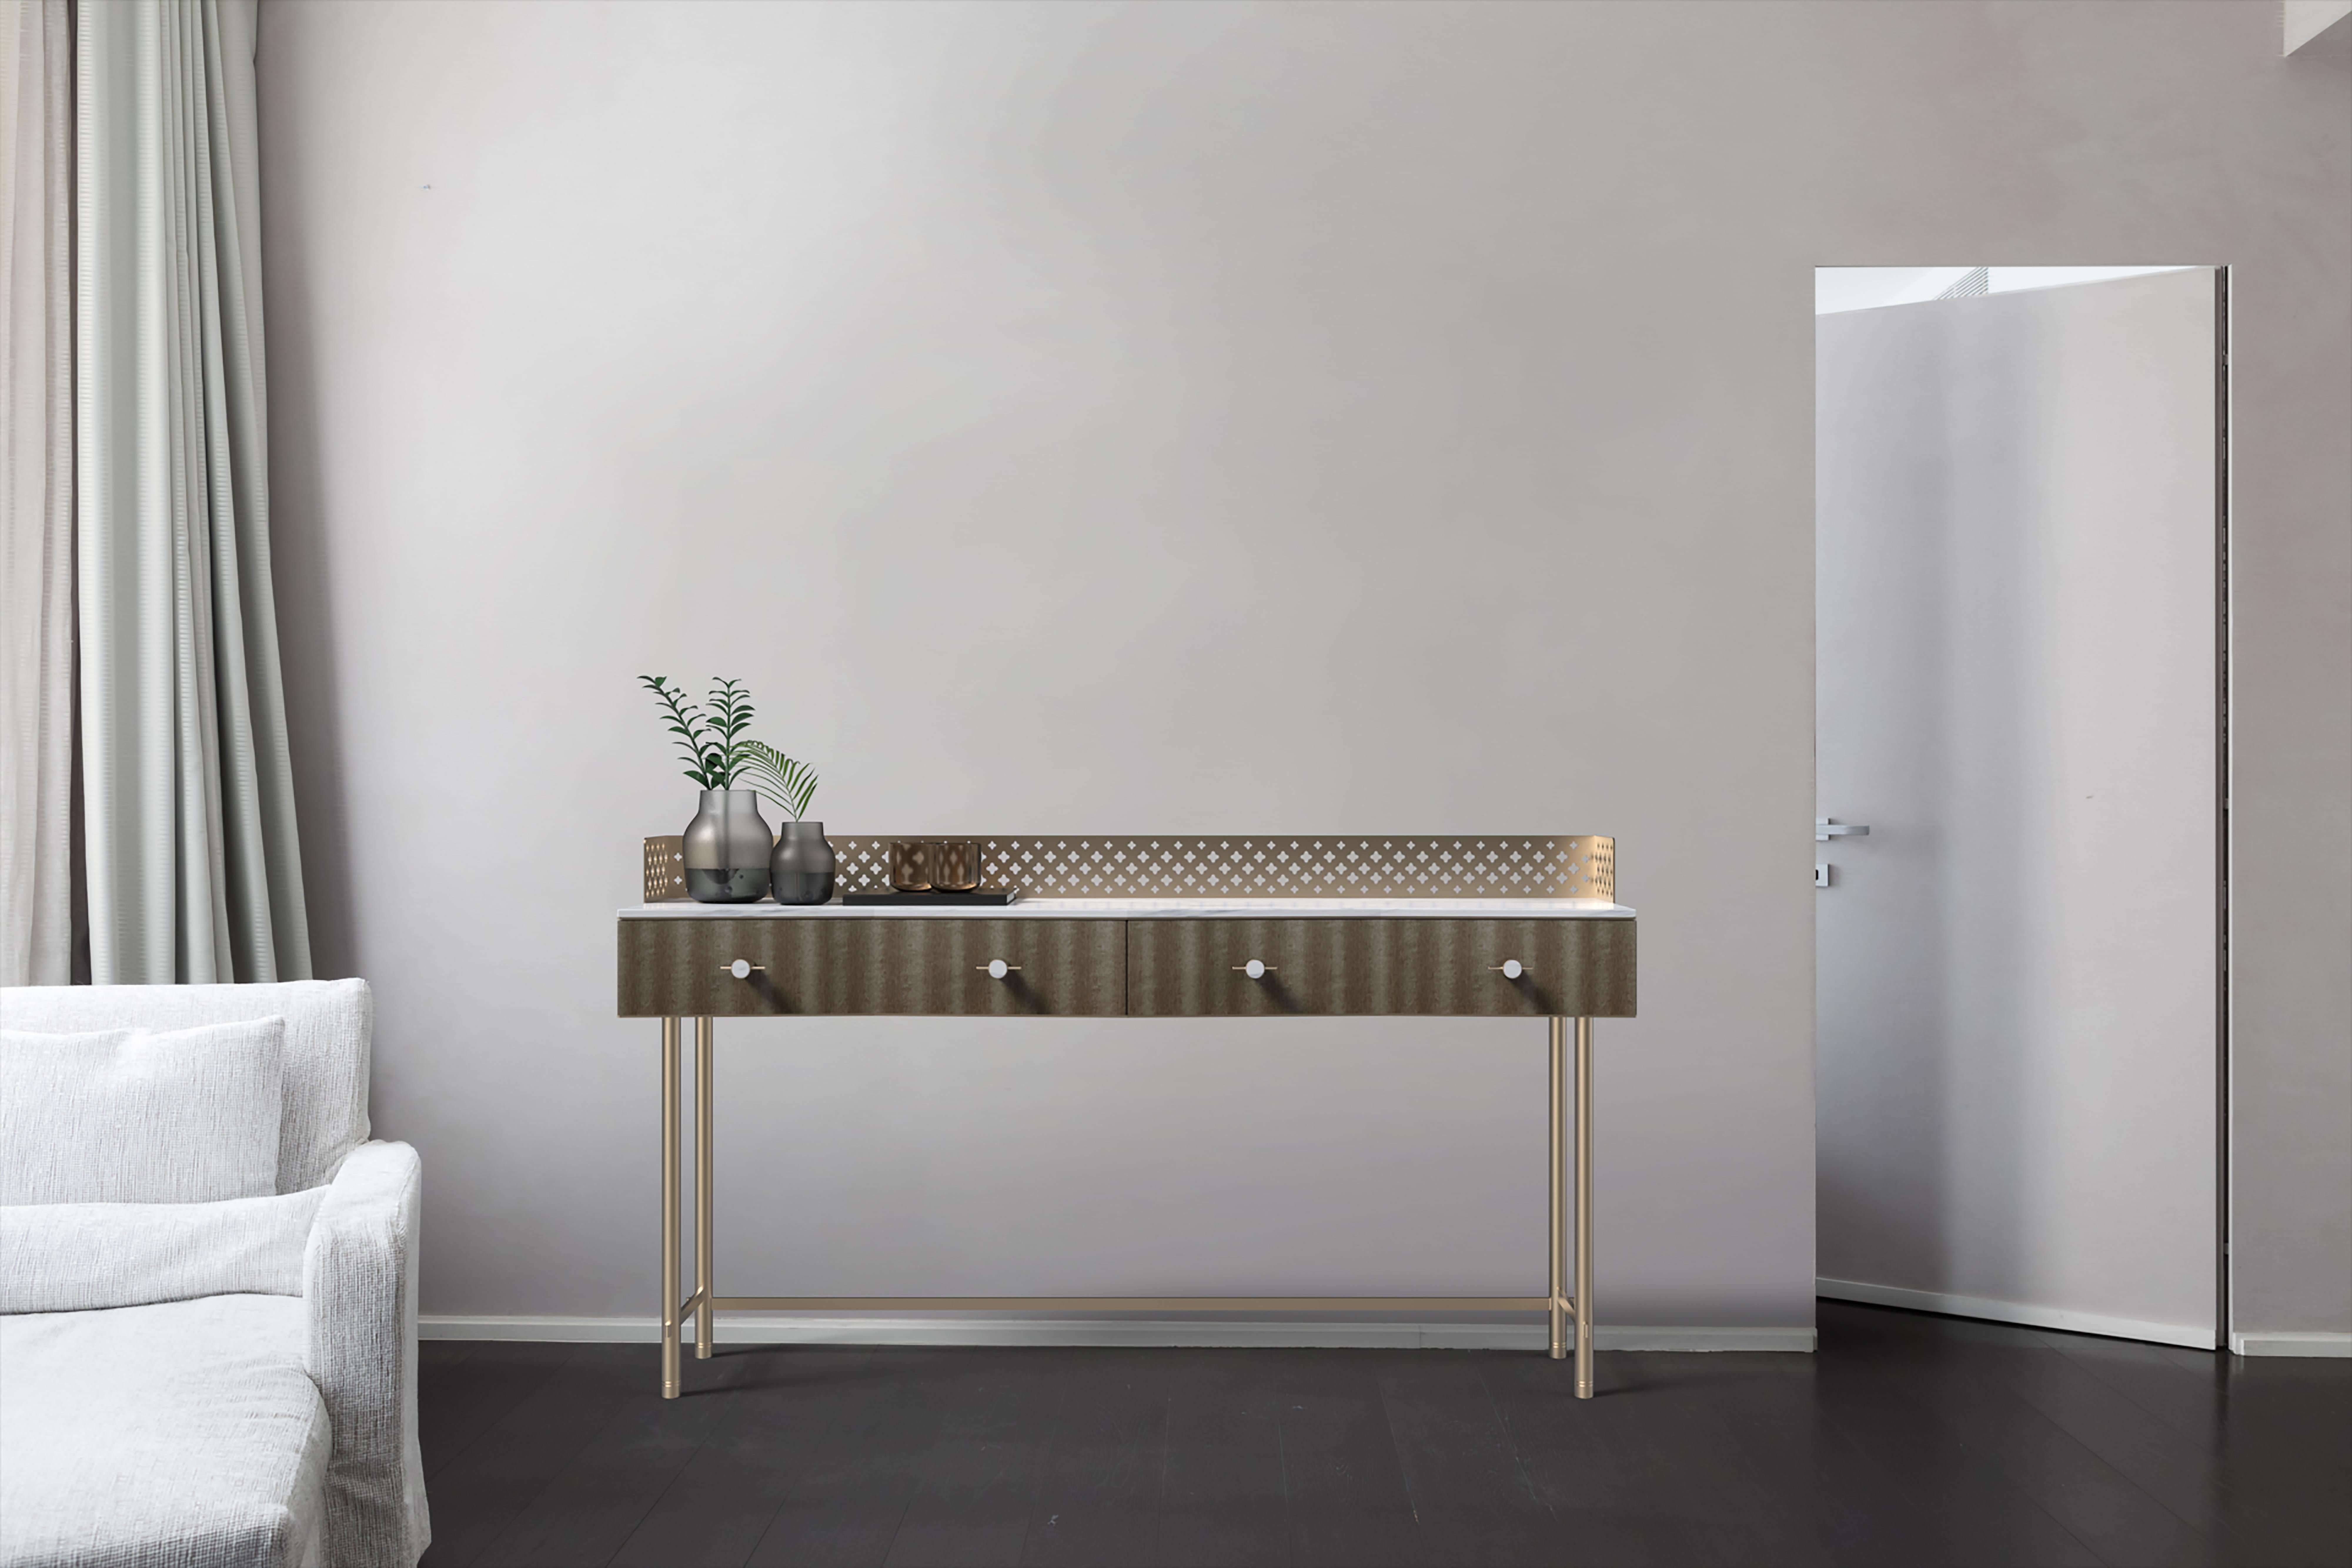 Italian Savita Artisanal Luxury Wooden Console, Metal Structure, Made in Italy For Sale